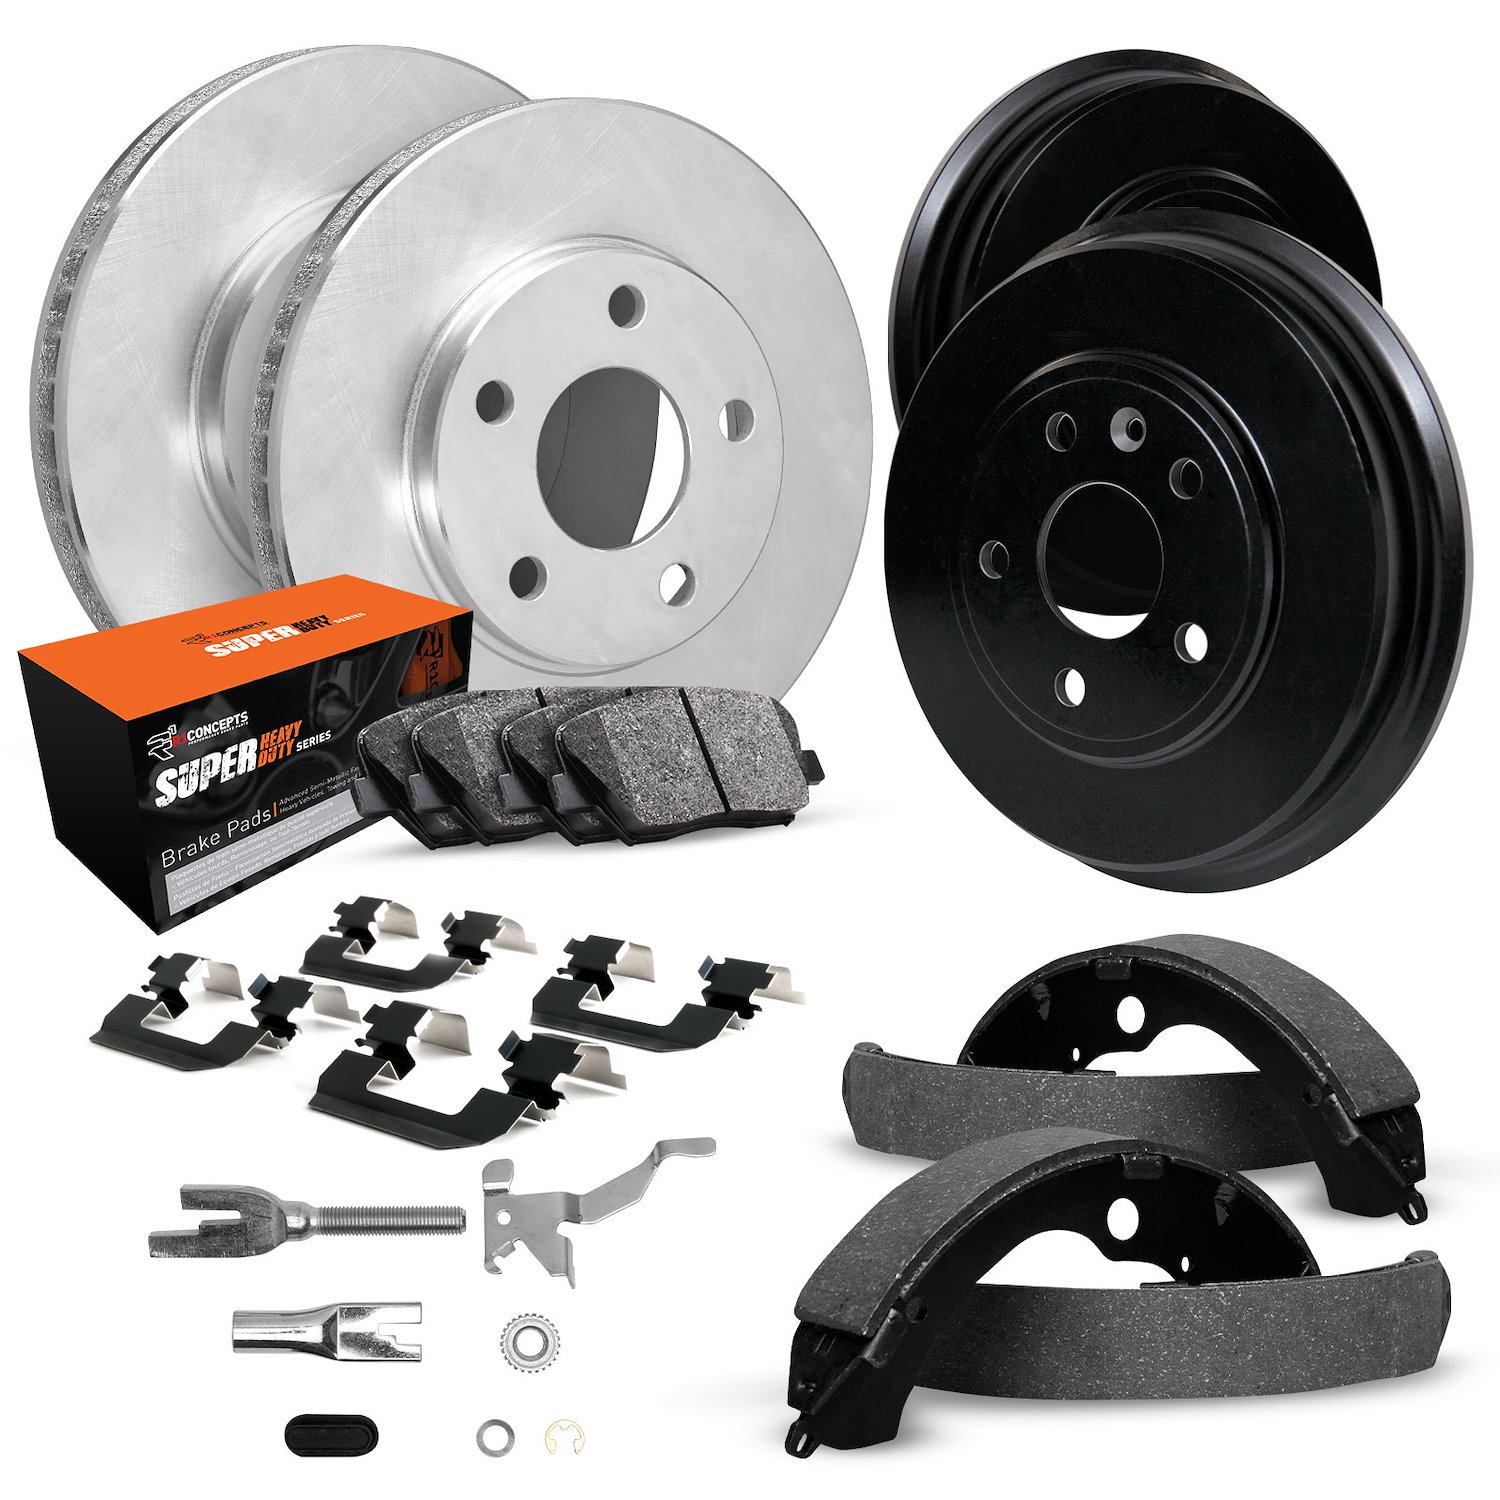 E-Line Blank Brake Rotor & Drum Set w/Super-Duty Pads, Shoes, Hardware, & Adjusters, 1997-1999 Ford/Lincoln/Mercury/Mazda